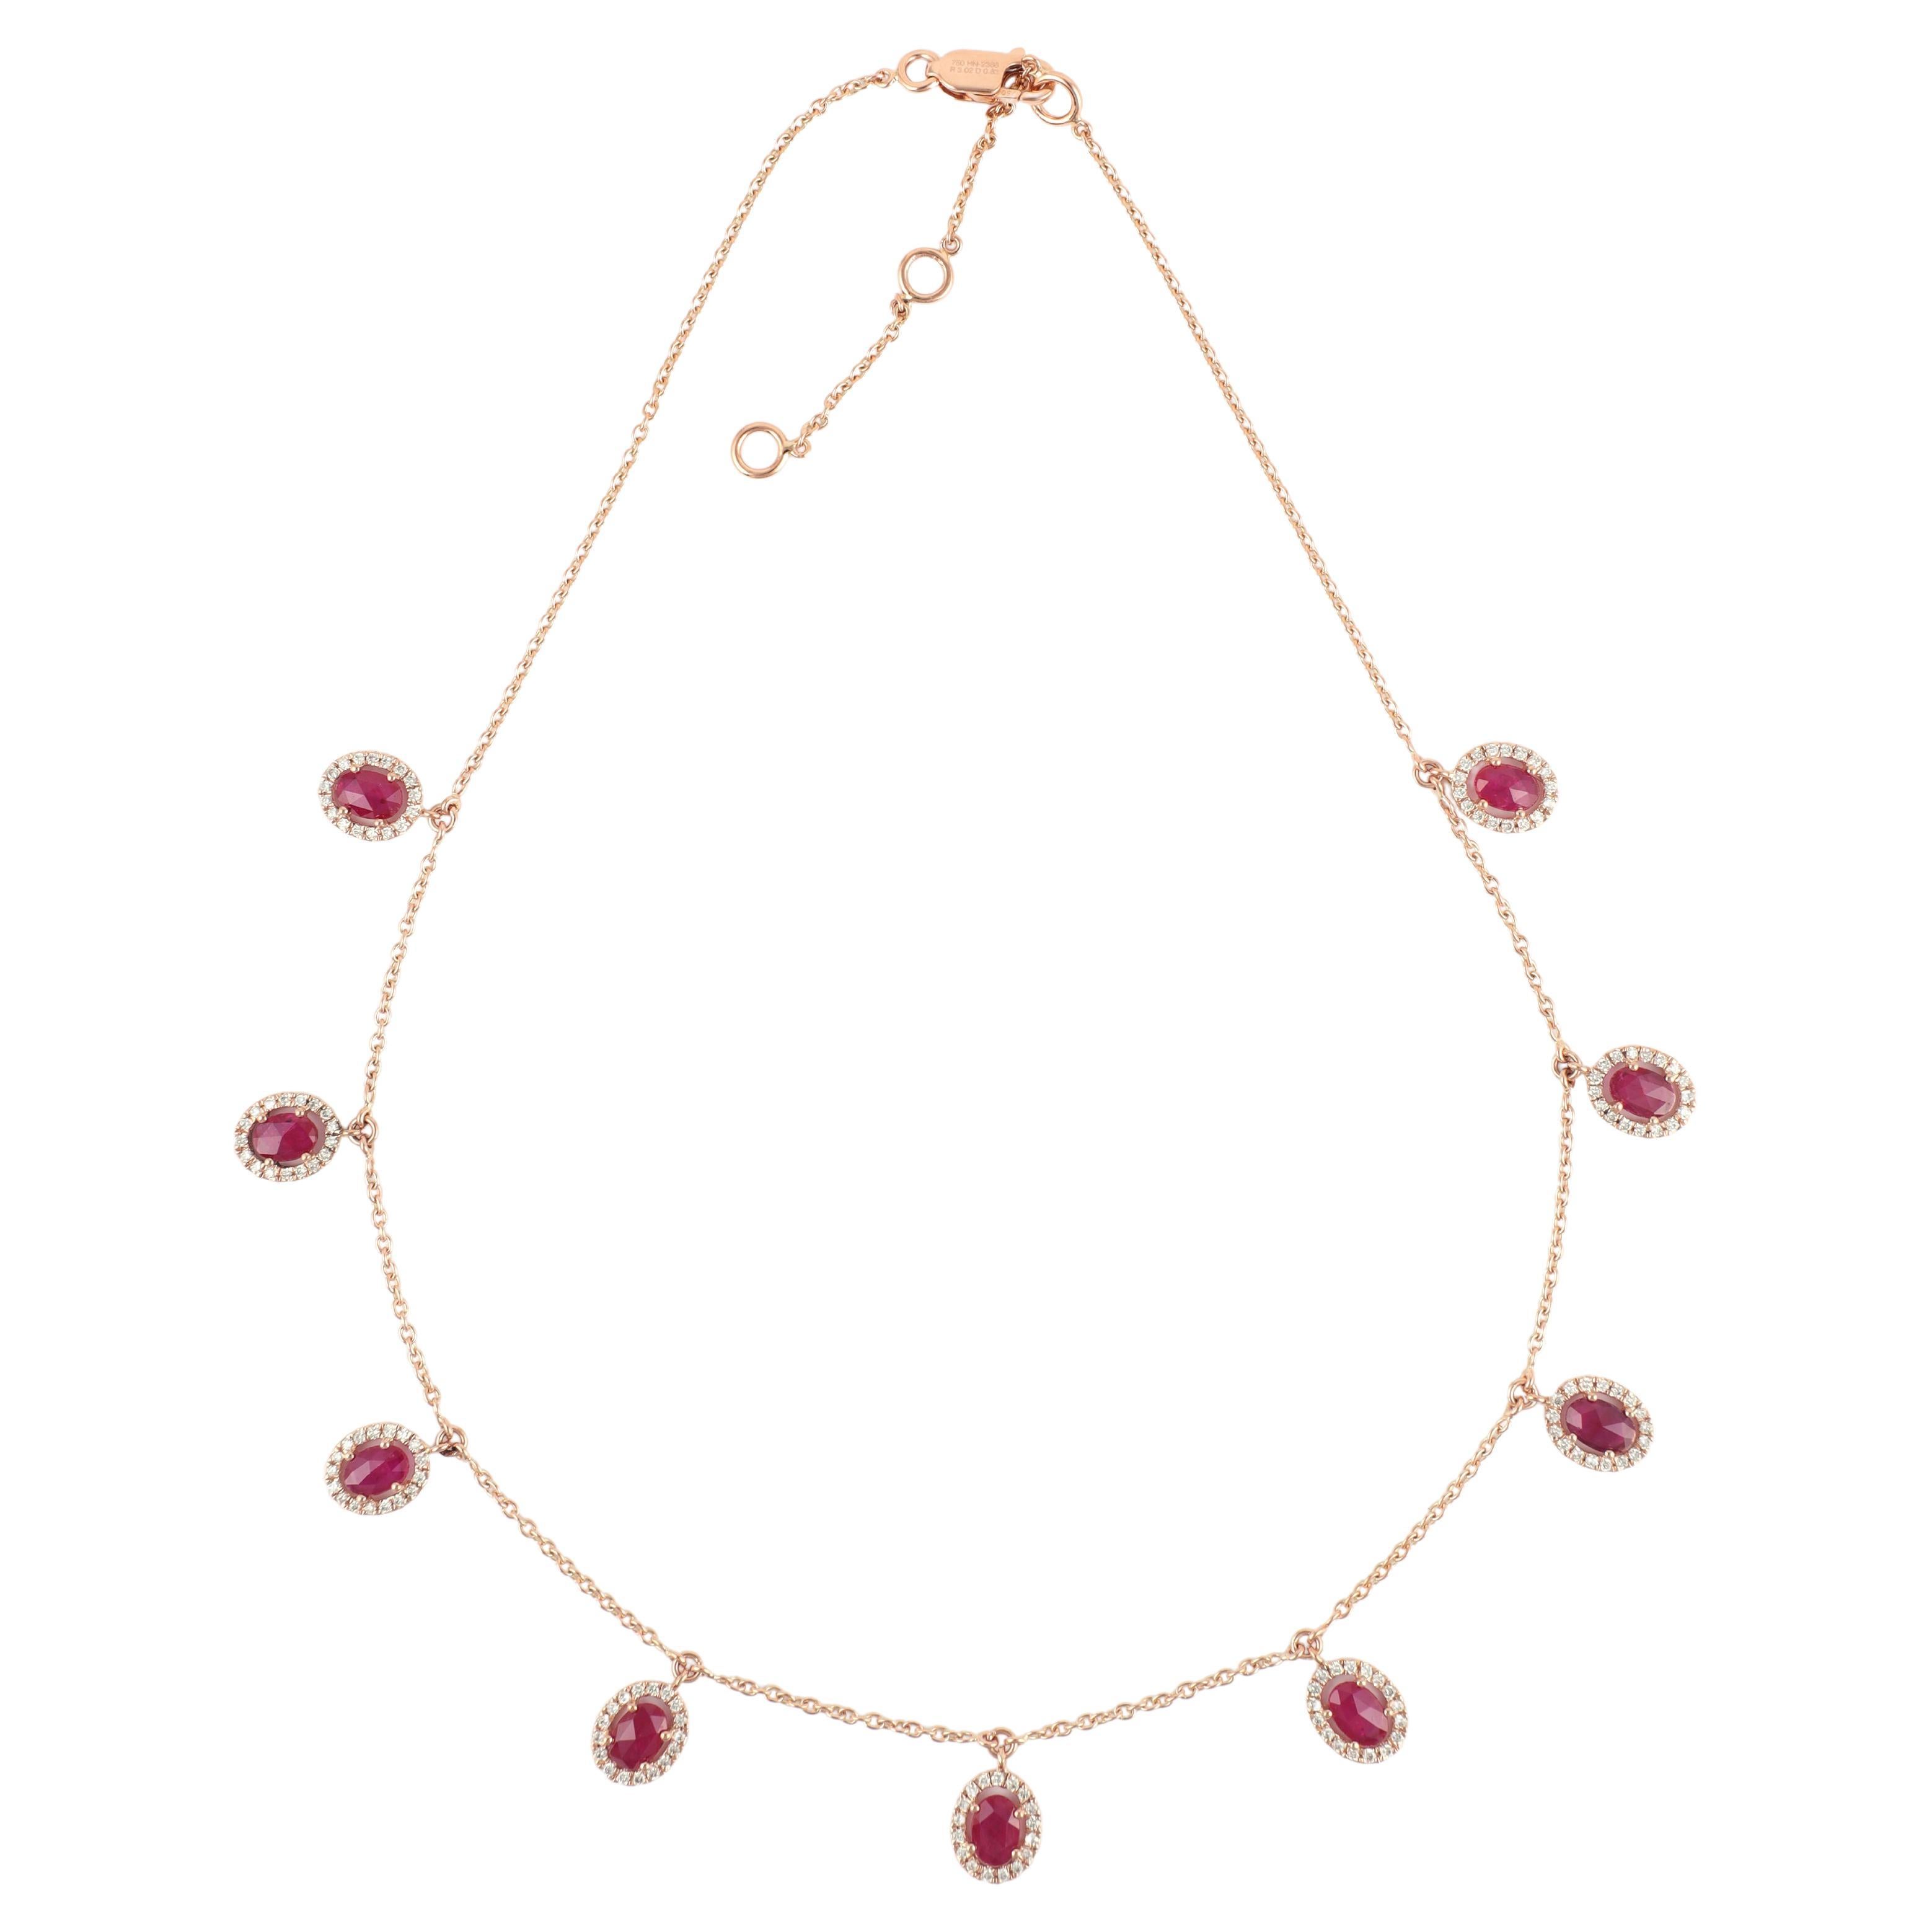 3.02 Carats Ruby & 0.83 Carats Diamond Chain Necklace in 18k Rose Gold For Sale